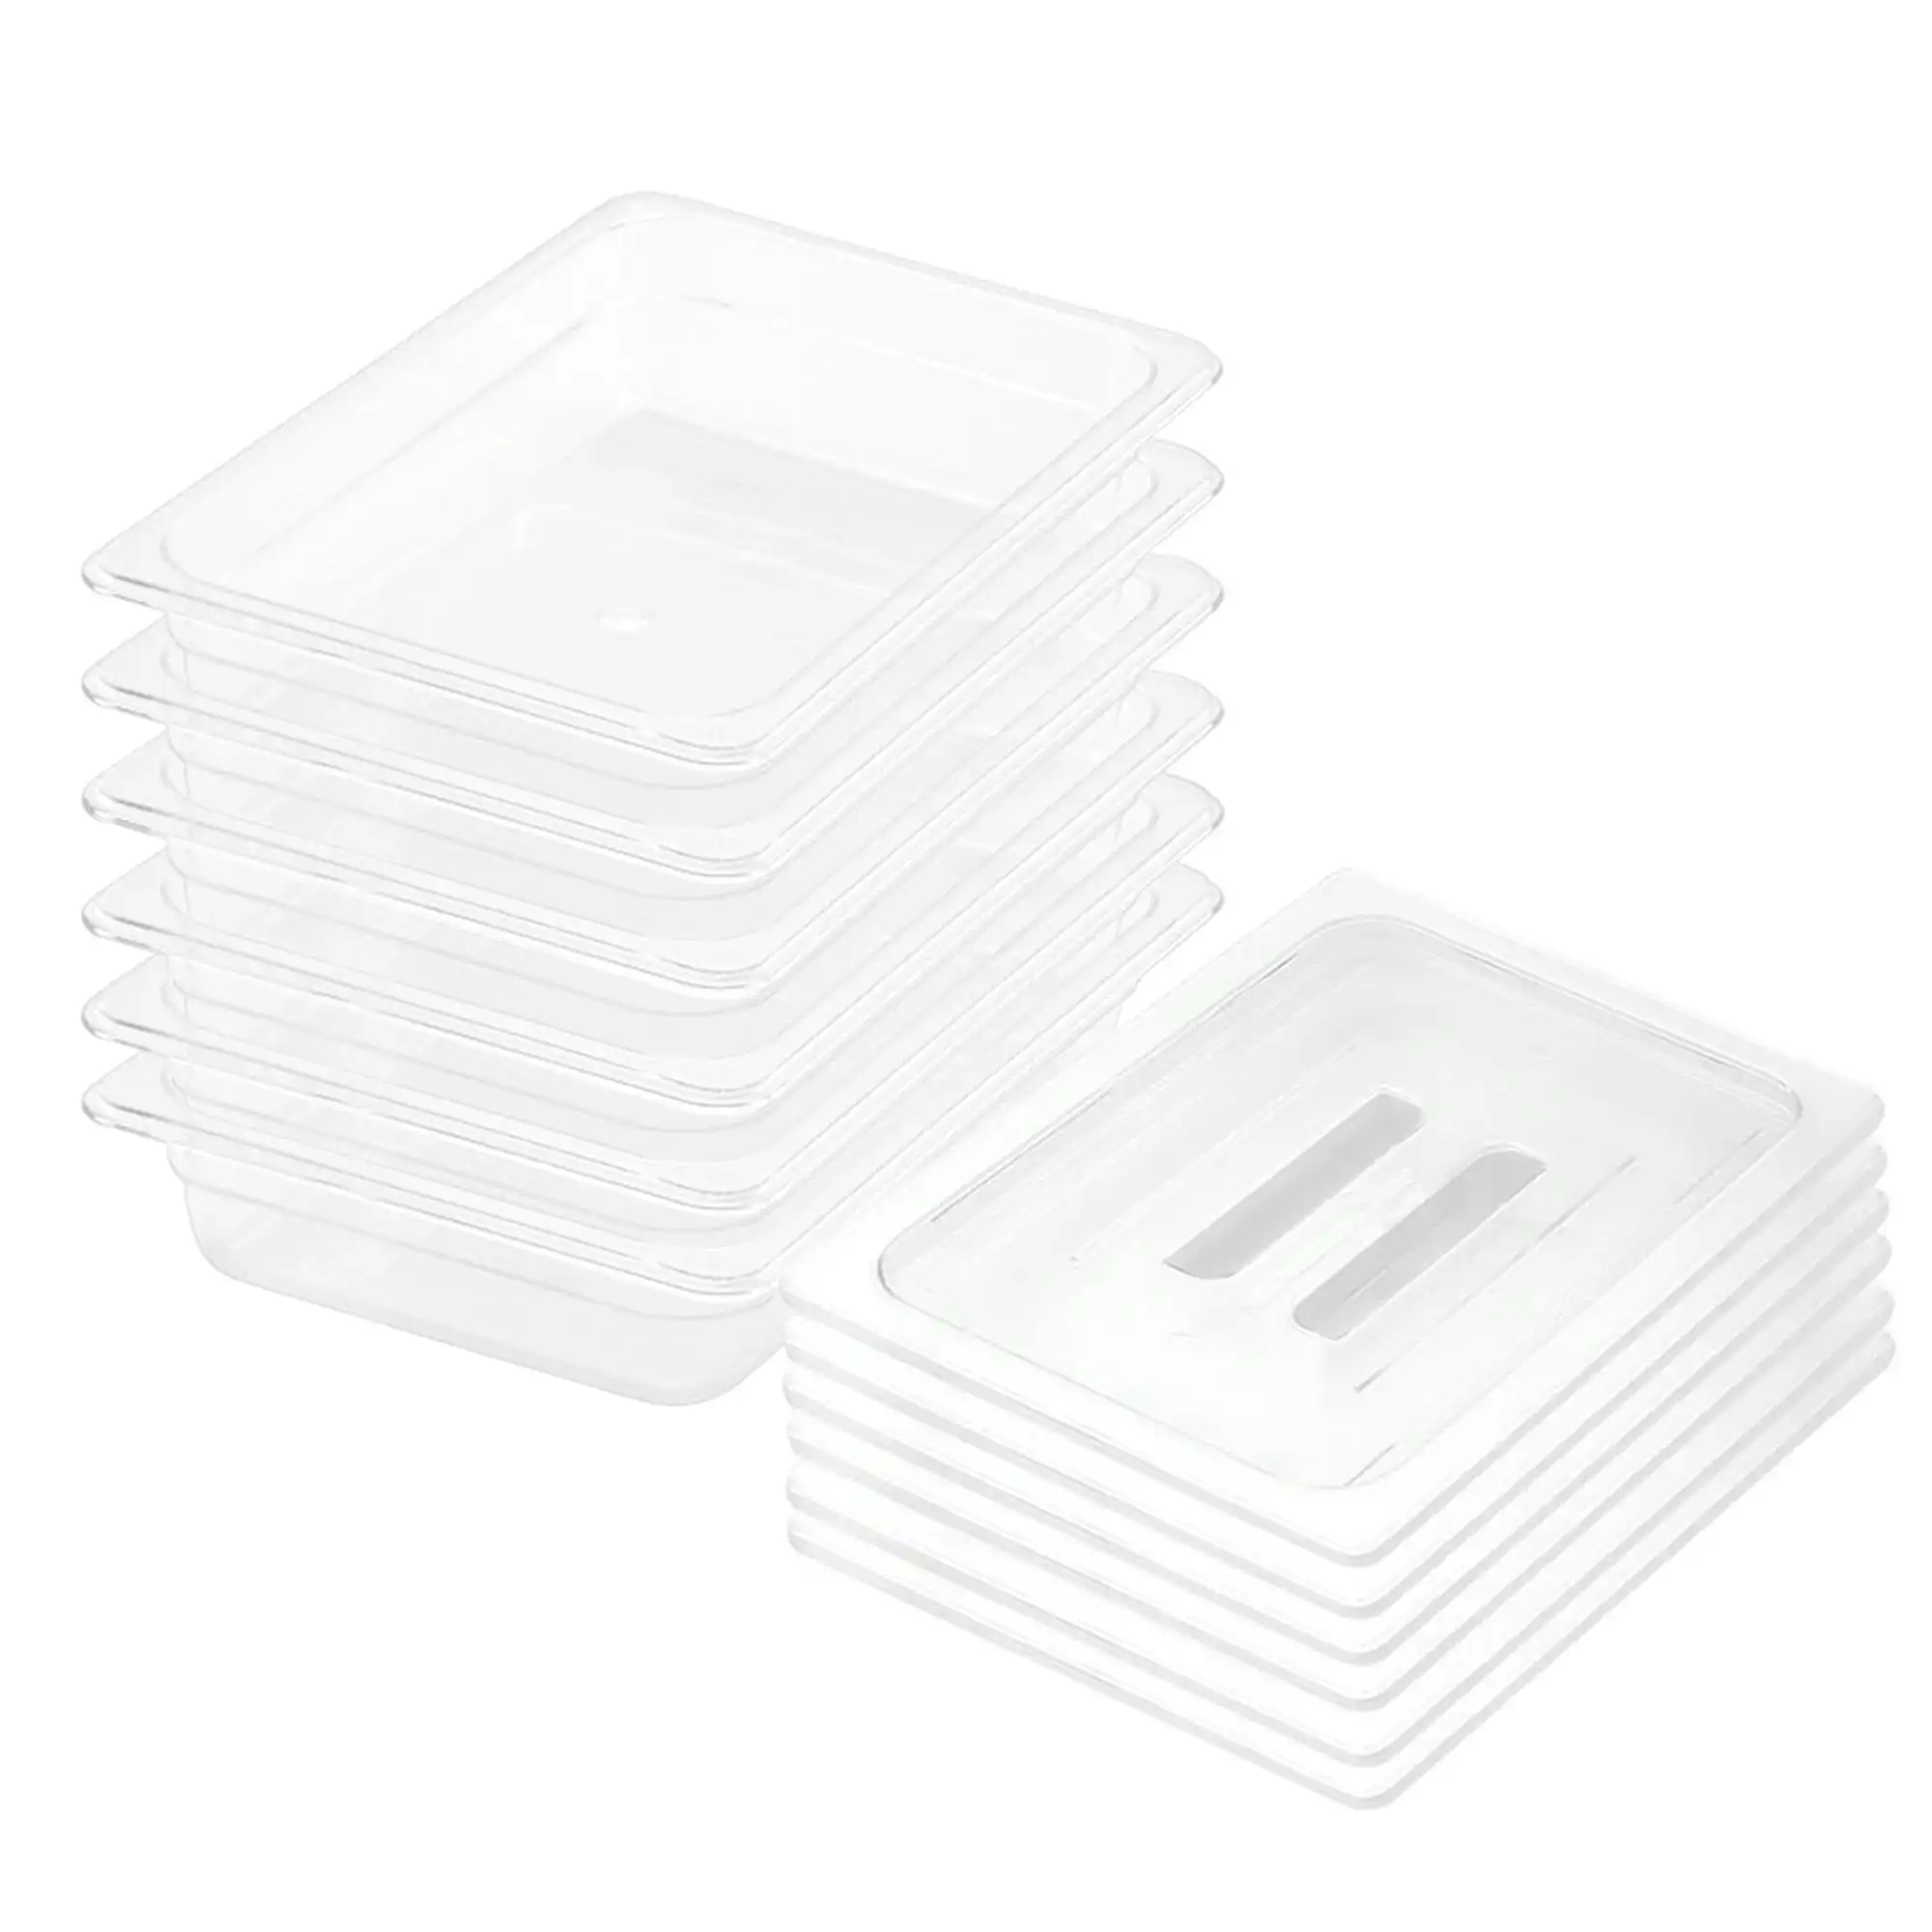 Soga 65mm Clear Gastronorm GN Pan 1/2 Food Tray Storage Bundle of 6 with Lid